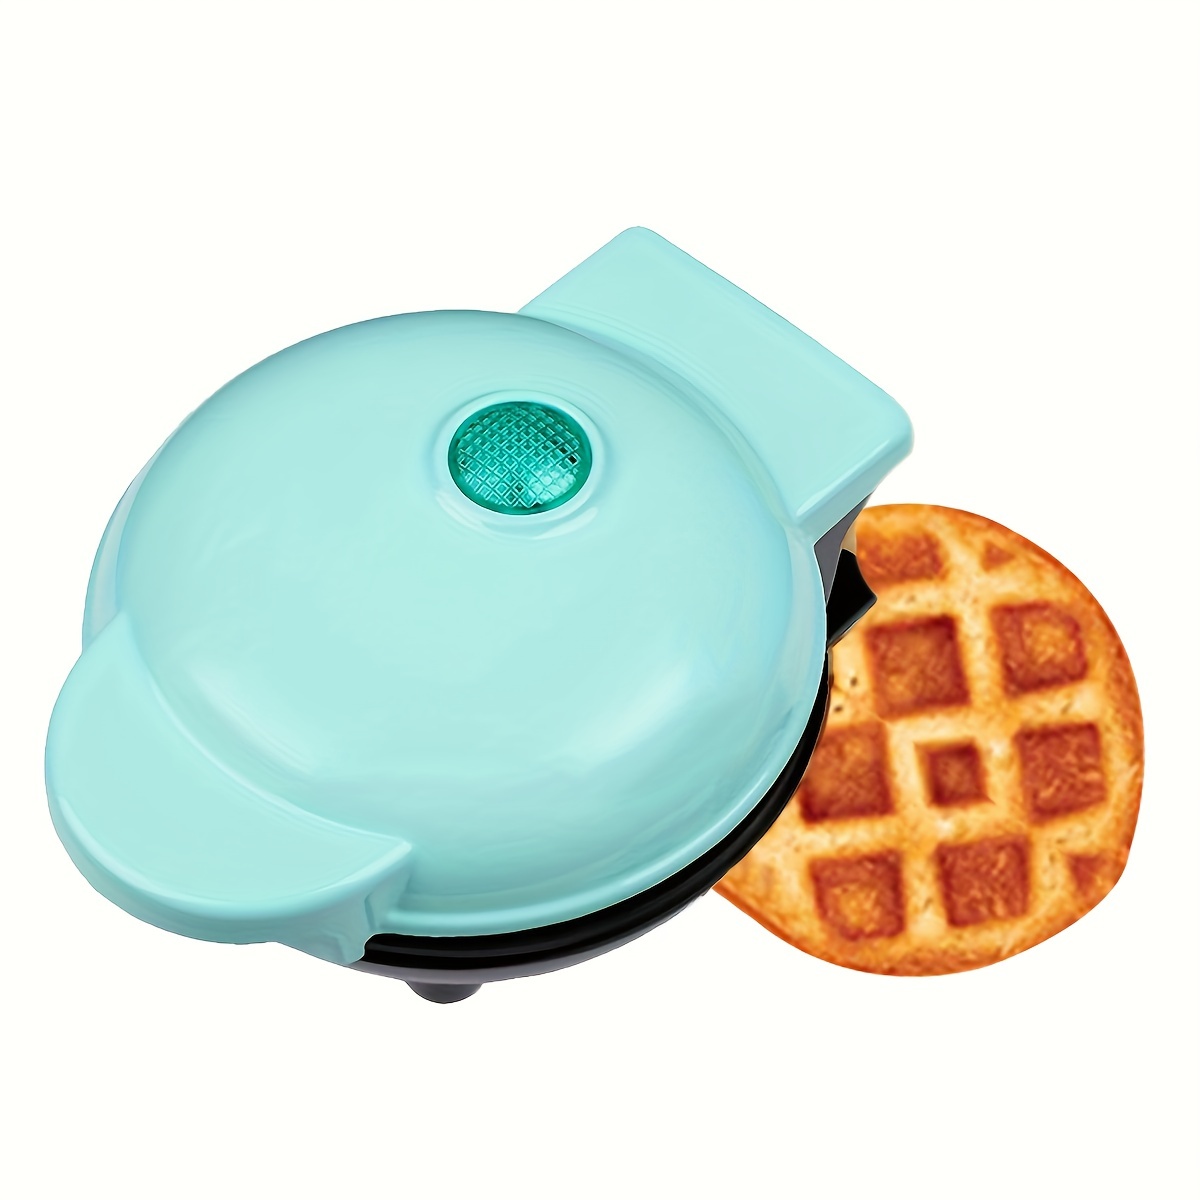 Pin by GoGirl Nc on Louis Vuitton  Future kitchen appliances, Waffle  irons, Waffle maker